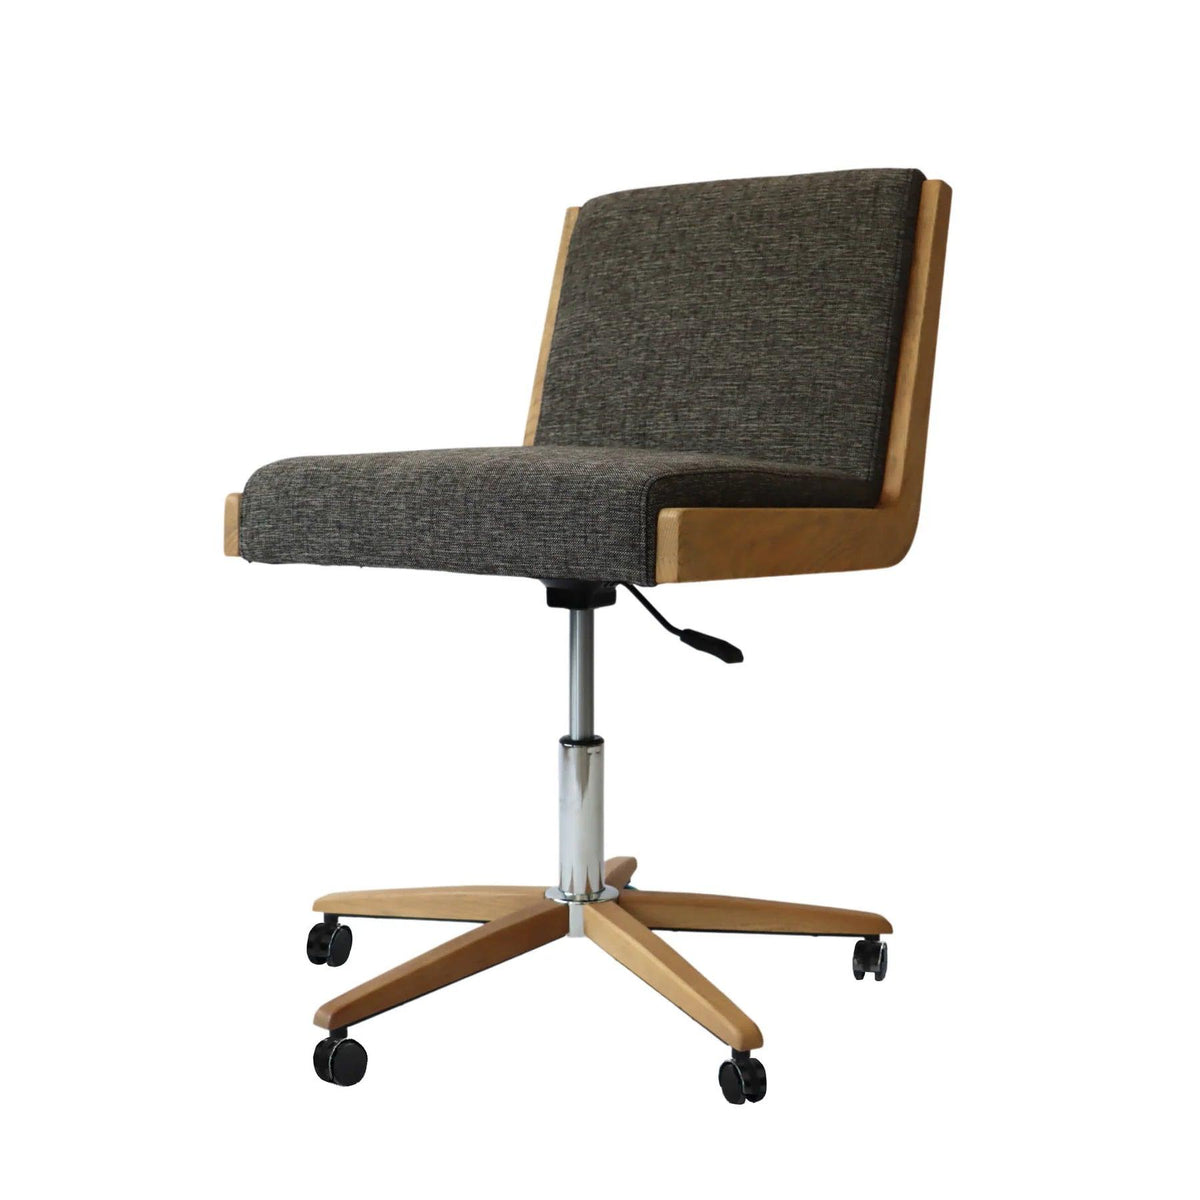 MONTEREY Office Chair - Oatmeal (Limited Edition) - Northern Interiors